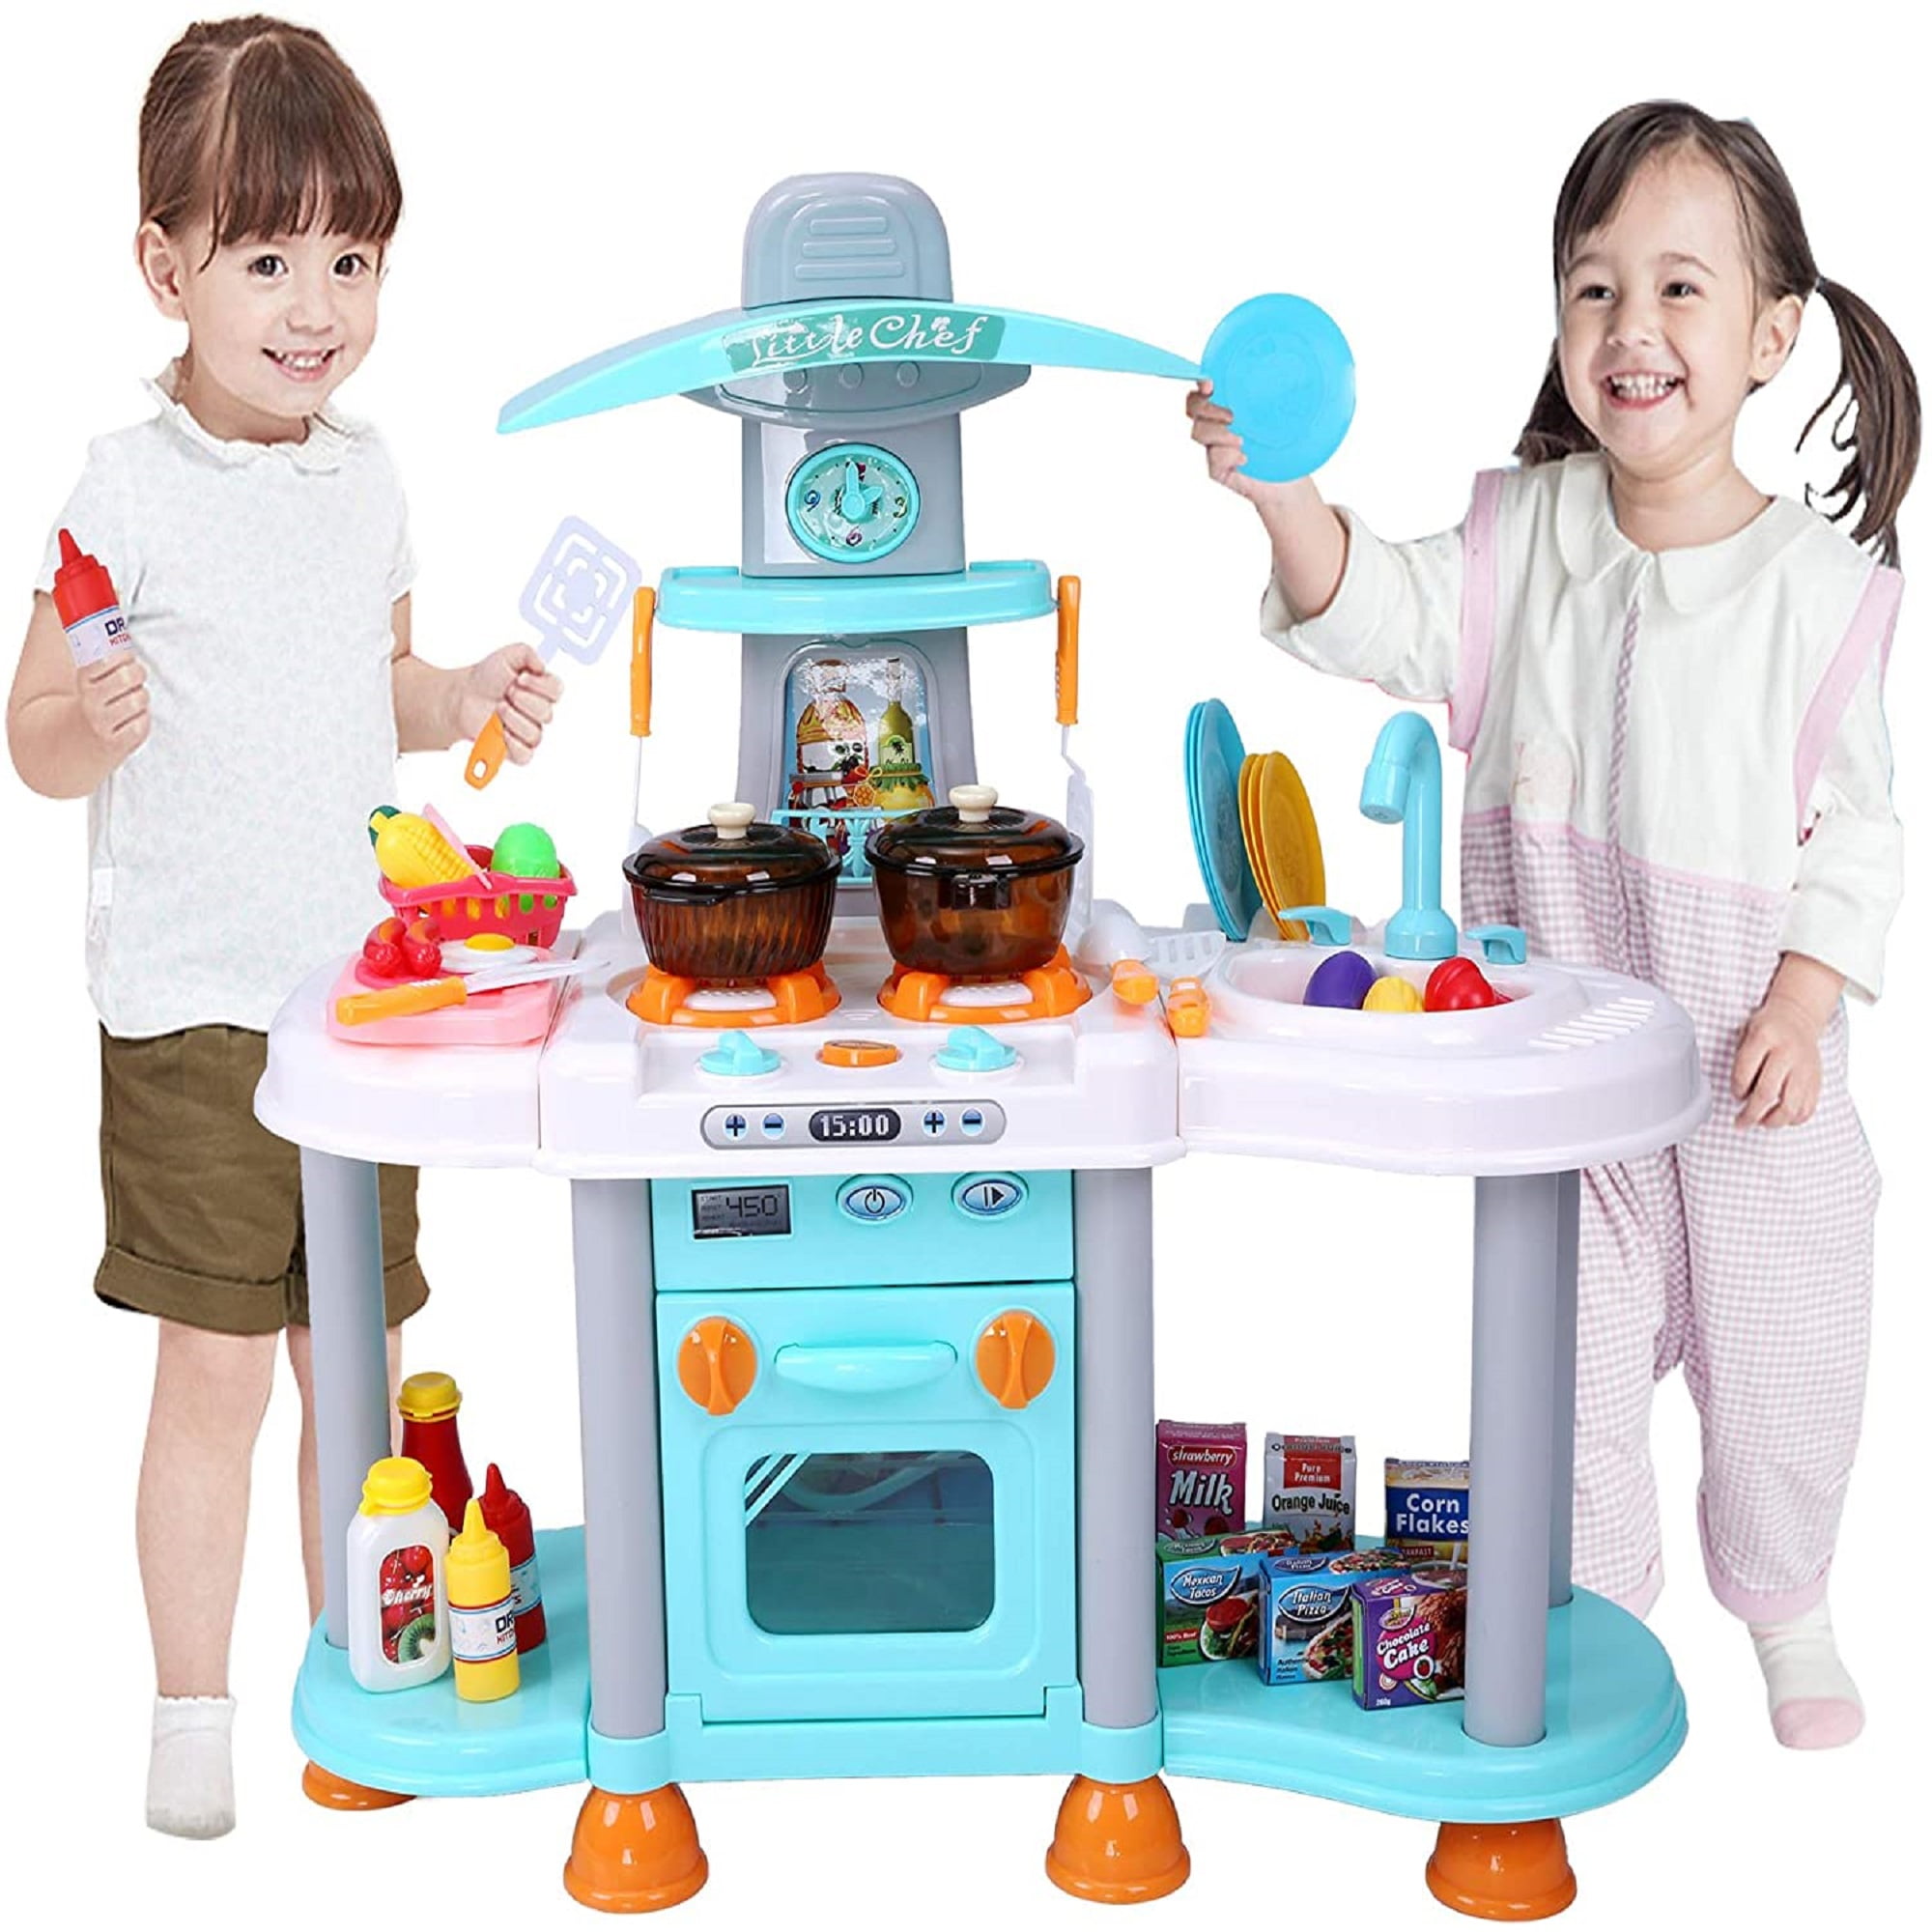 Kids Kitchen Playset Cooking Toys Wooden Pretend Play Cook Food Toy Set White 